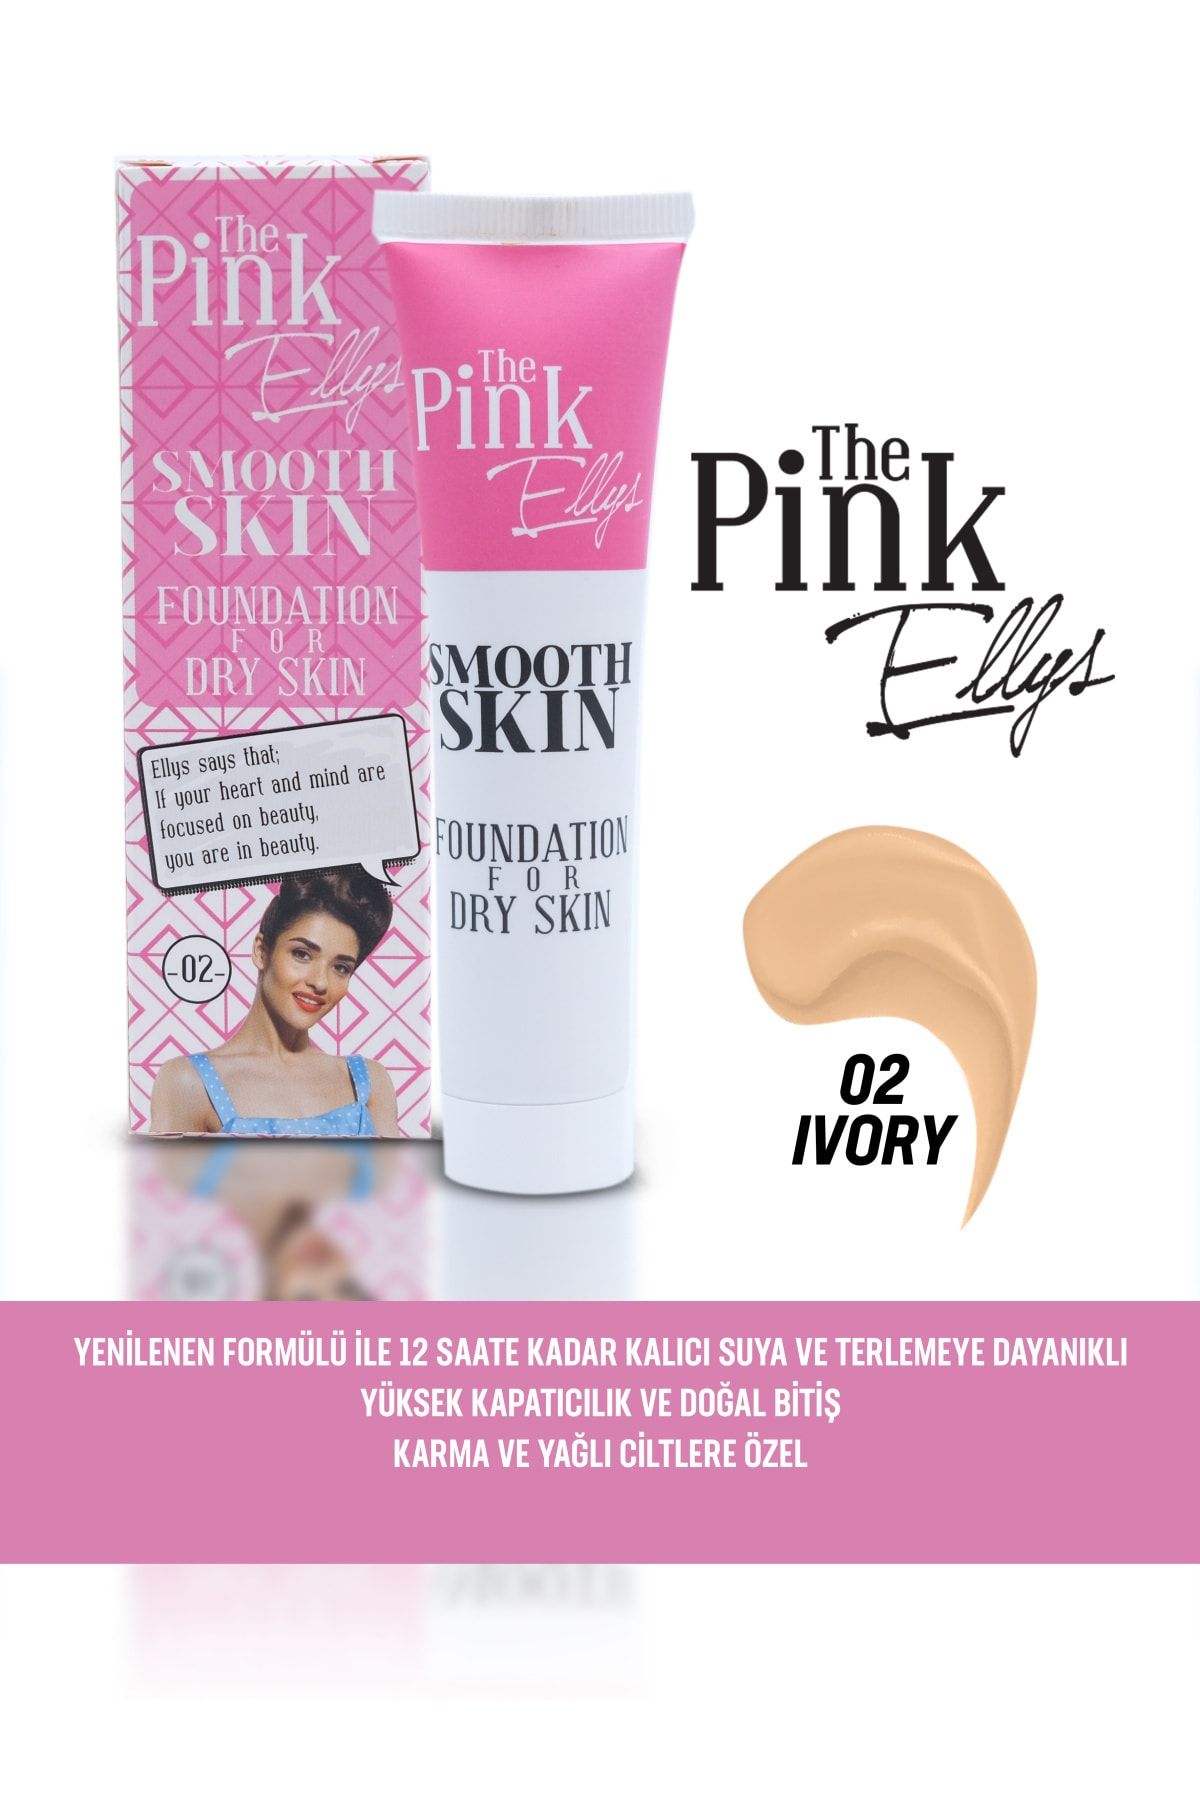 The Pink Ellys Smooth Skin Foundation For Dry 02